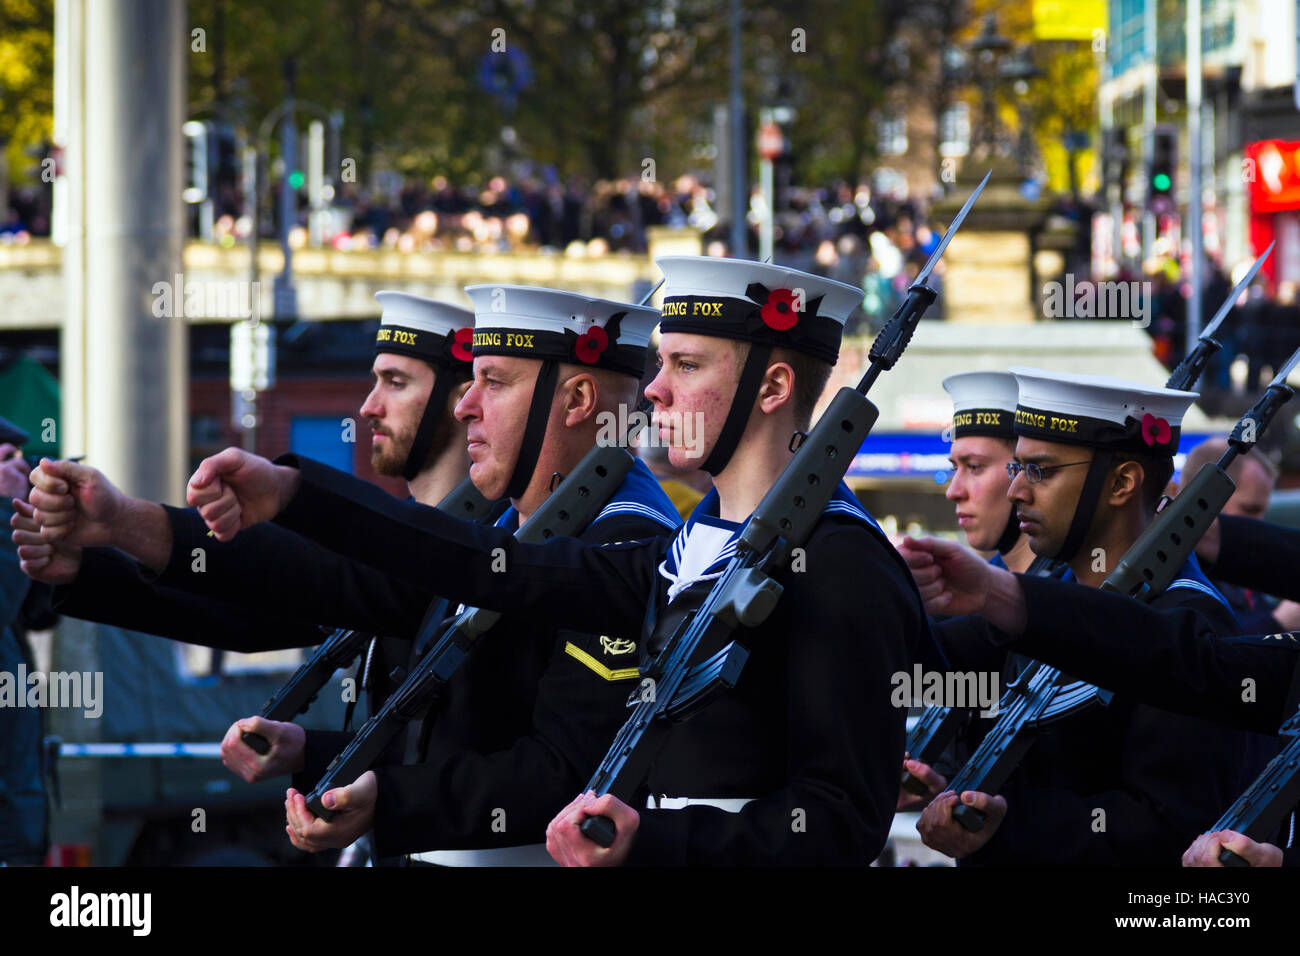 Participants in the Remembrance Day Parade, Bristol, UK, 2016 Stock Photo